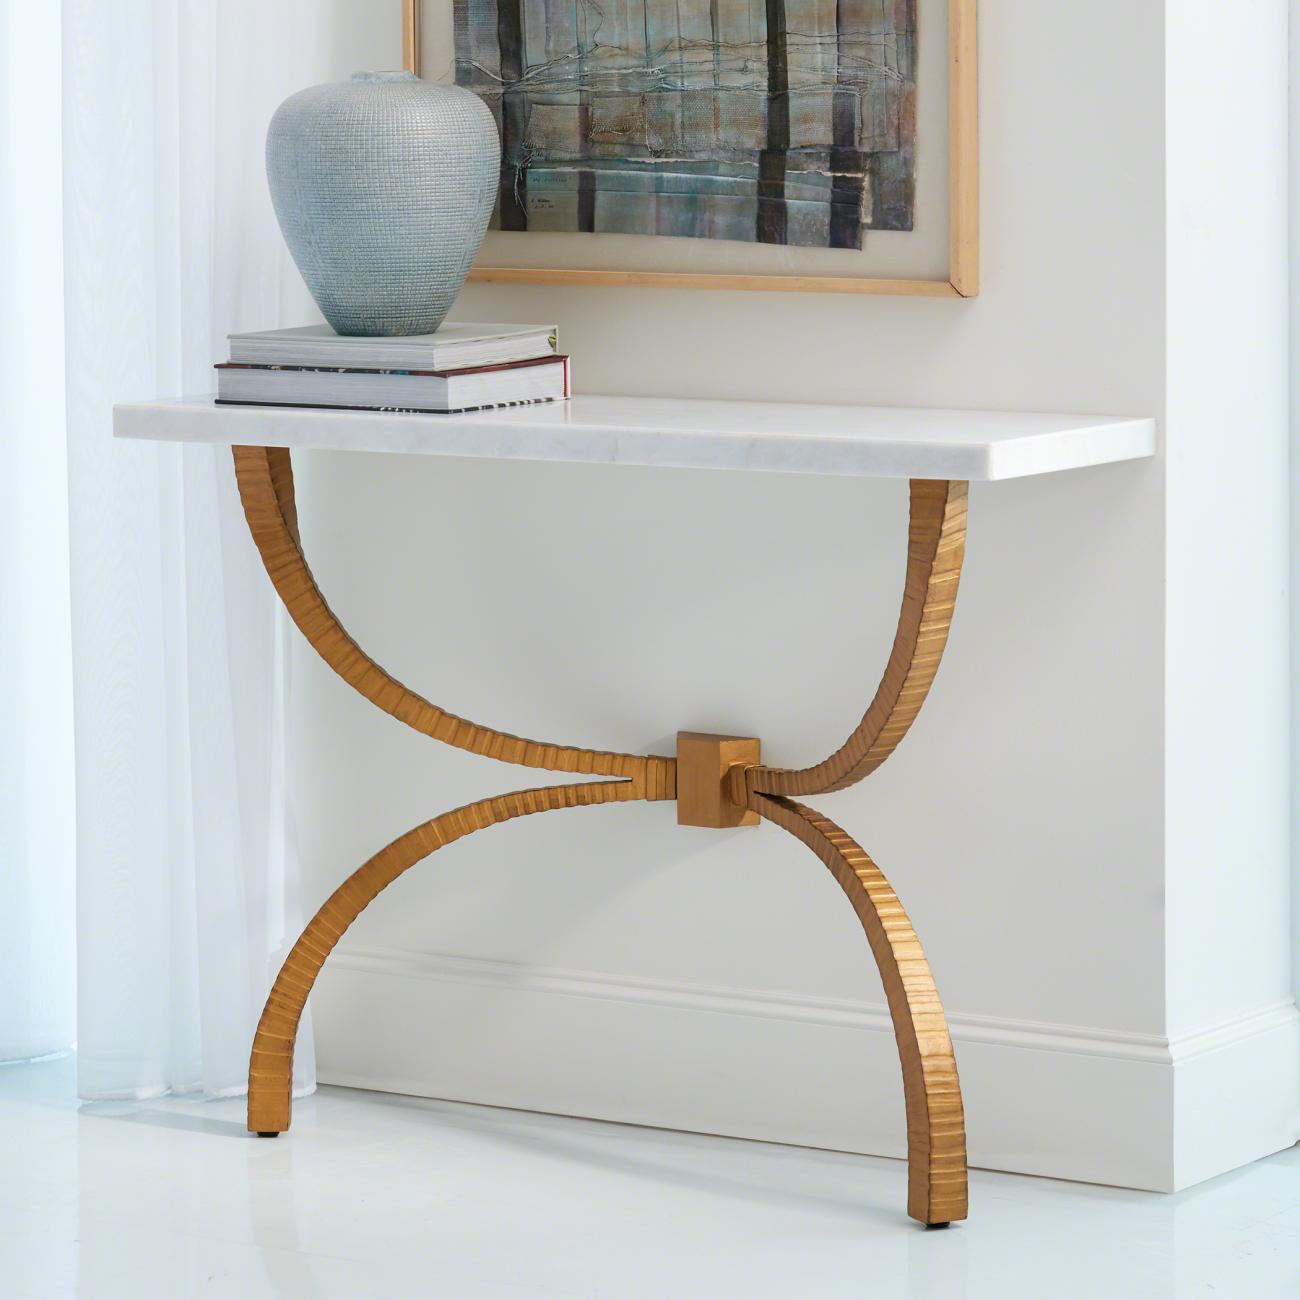 Tenton console with Gold Leaf finished legs and a marble top from Global Views